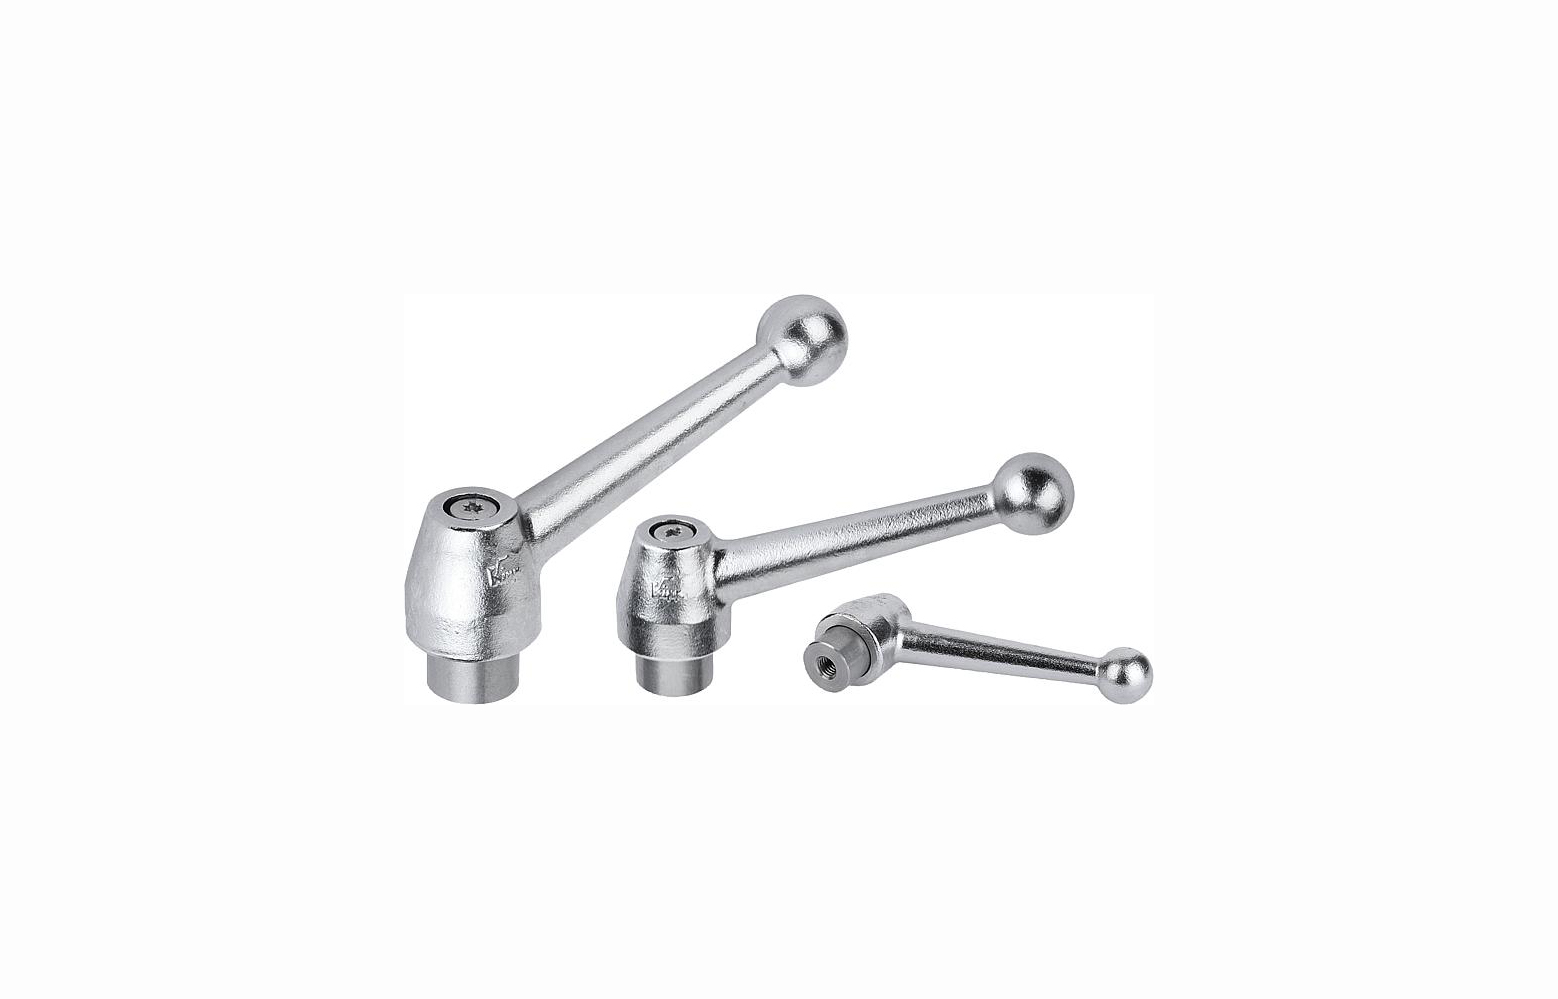 K0121 Clamping levers with internal thread, stainless steel